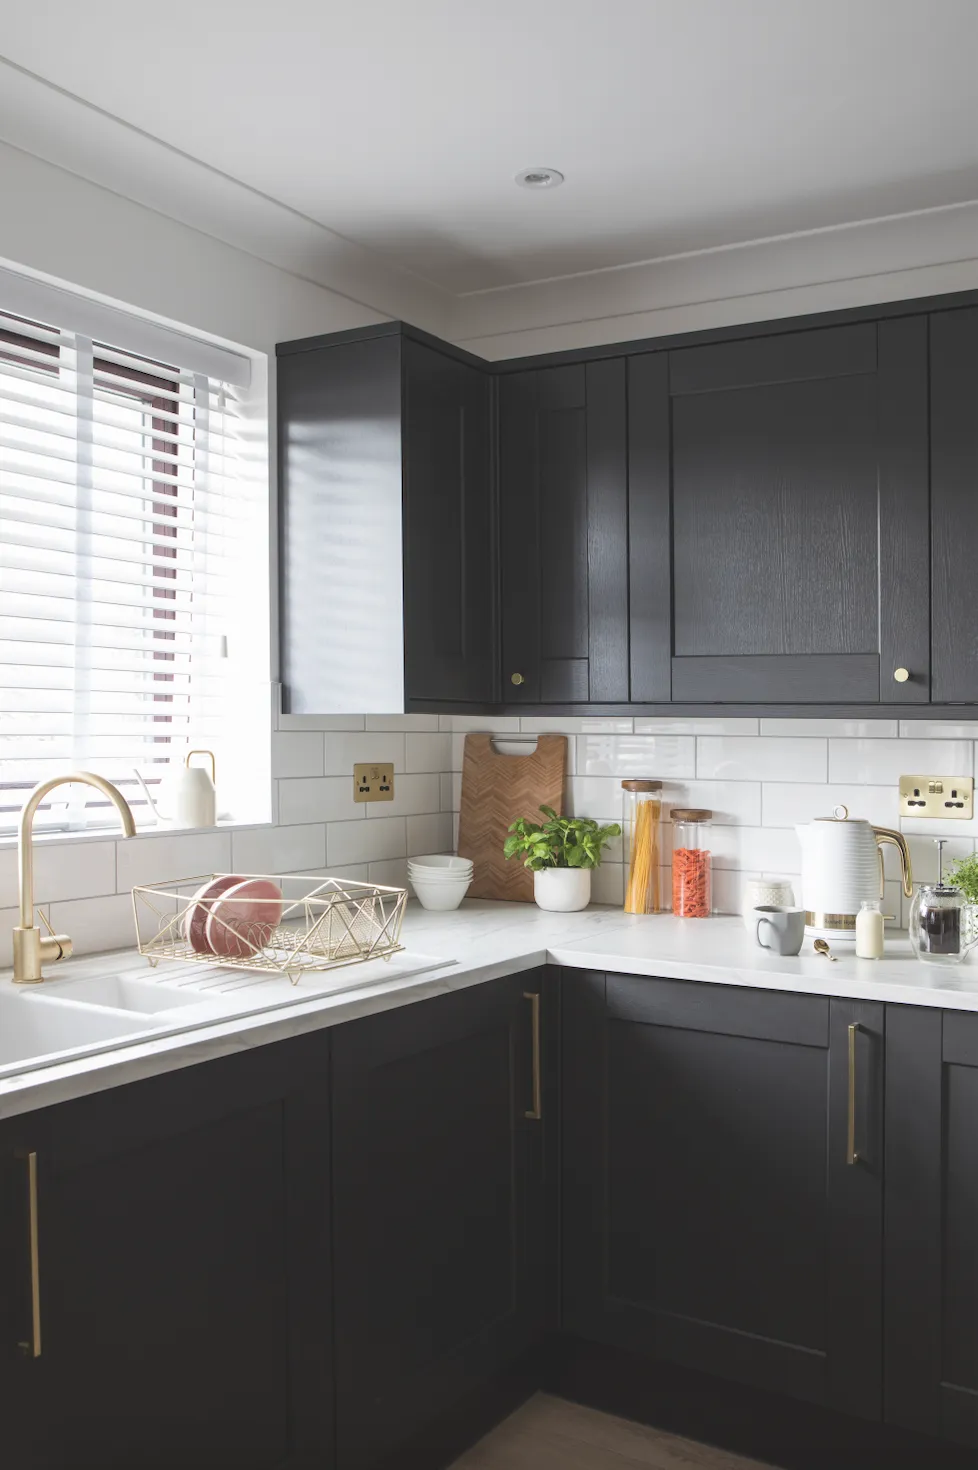 Becca chose metallic fixtures and fittings to lift her dramatic dark kitchen and make it feel upscale. ‘We focused on the details, choosing a brass tap, handles and plug sockets – even the radiator has brass fittings,’ Becca explains